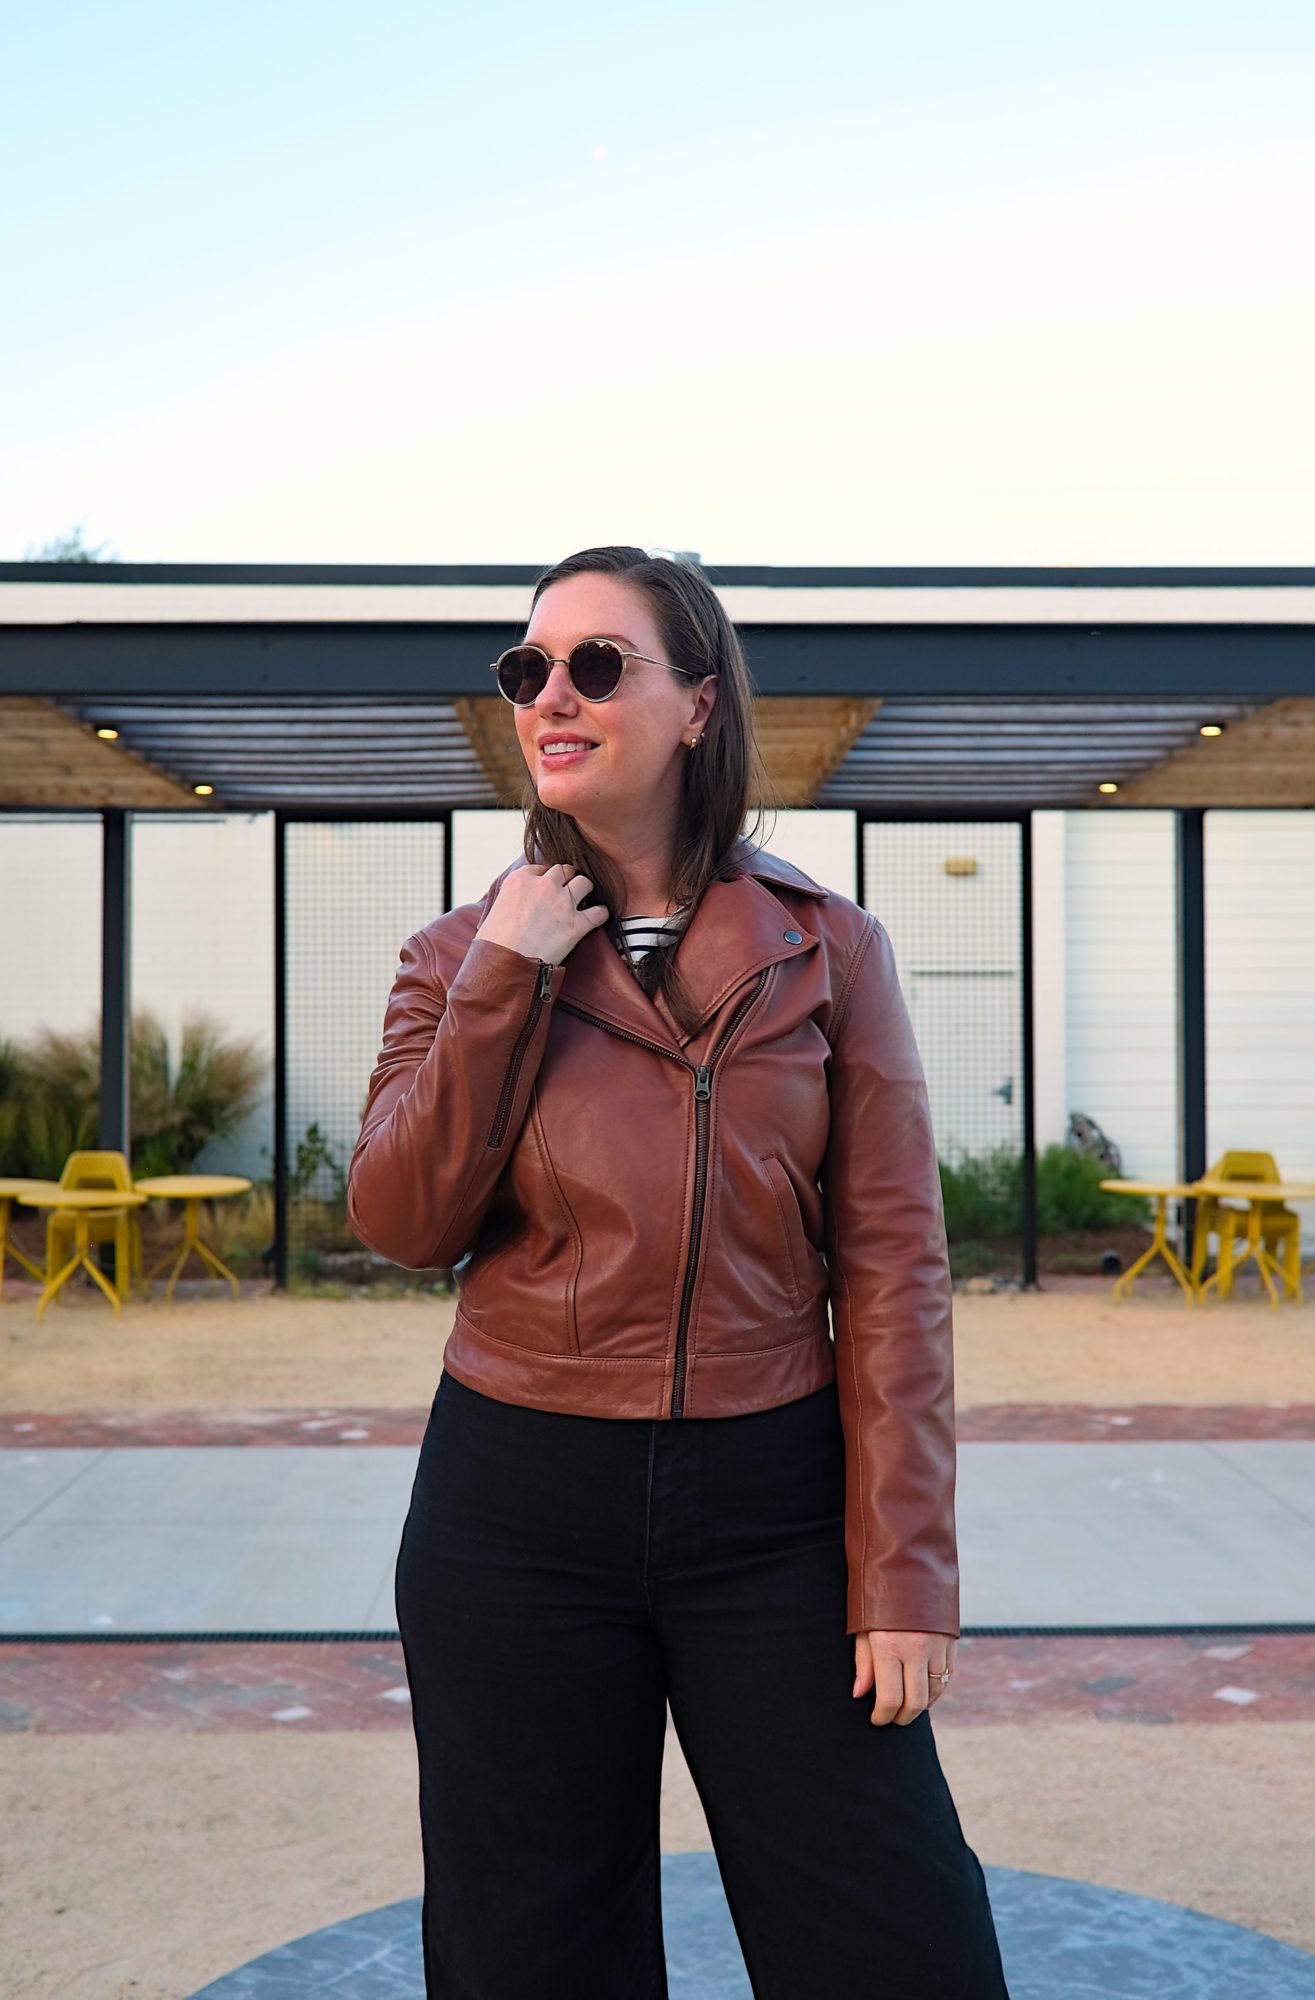 Alyssa wears the ABLE leather jacket zipped